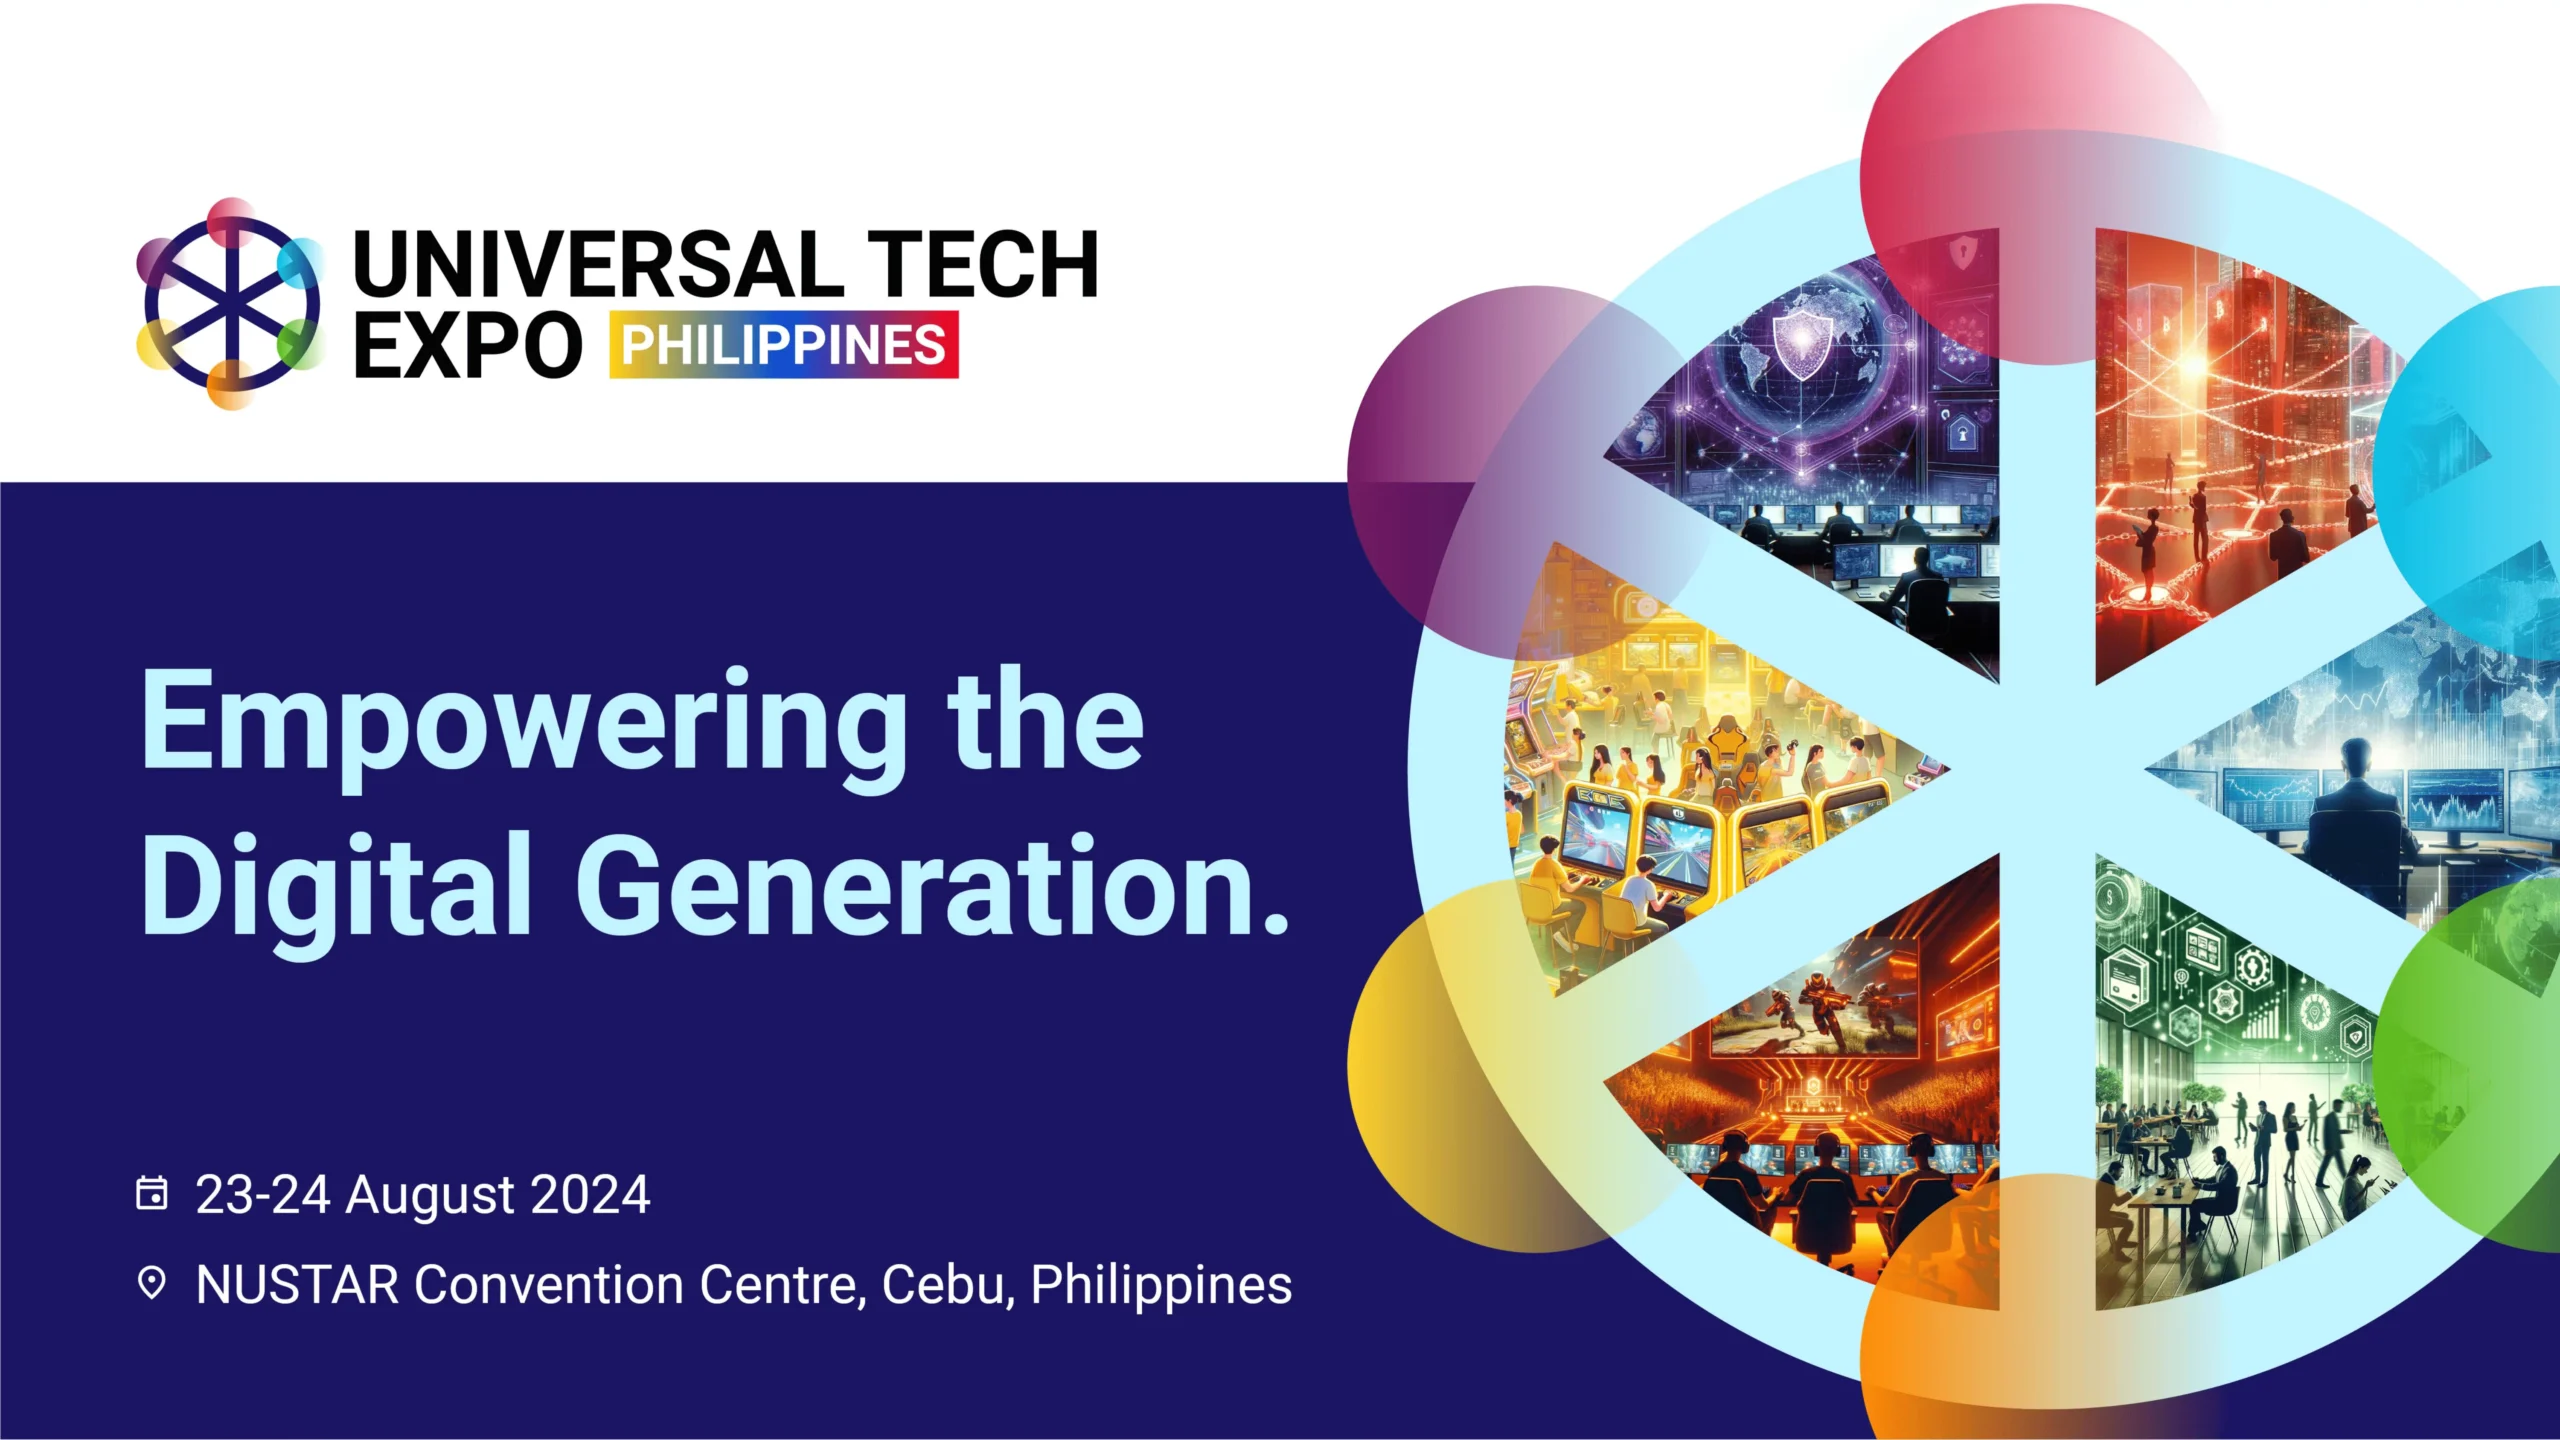 REVOLUTIONIZING TECH: UNIVERSAL TECH EXPO 2024 IGNITES INNOVATION IN THE HEART OF SOUTHEAST ASIA